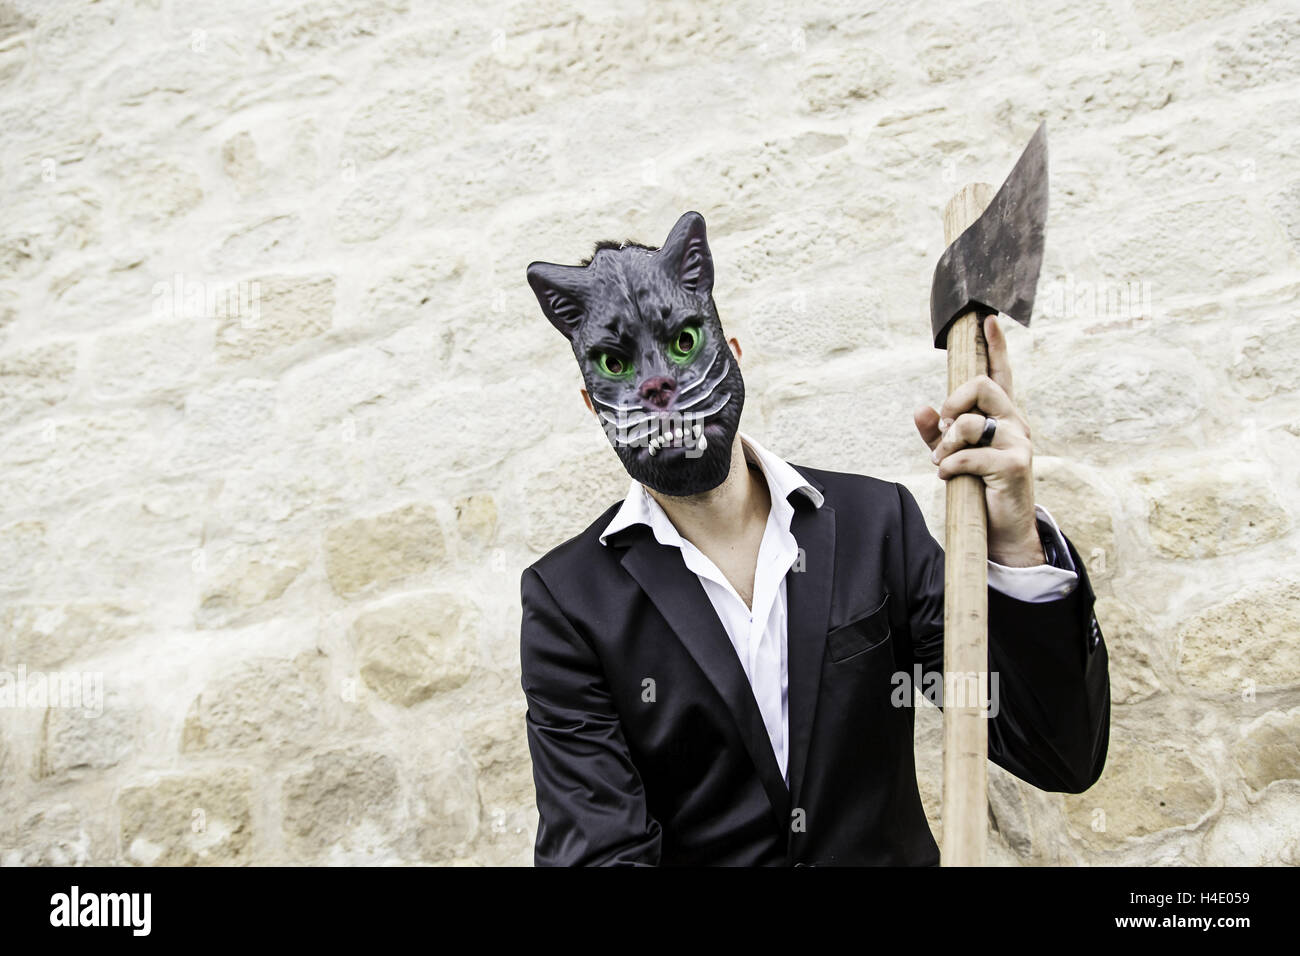 Murderers with masks and weapons, fear and violence Stock Photo